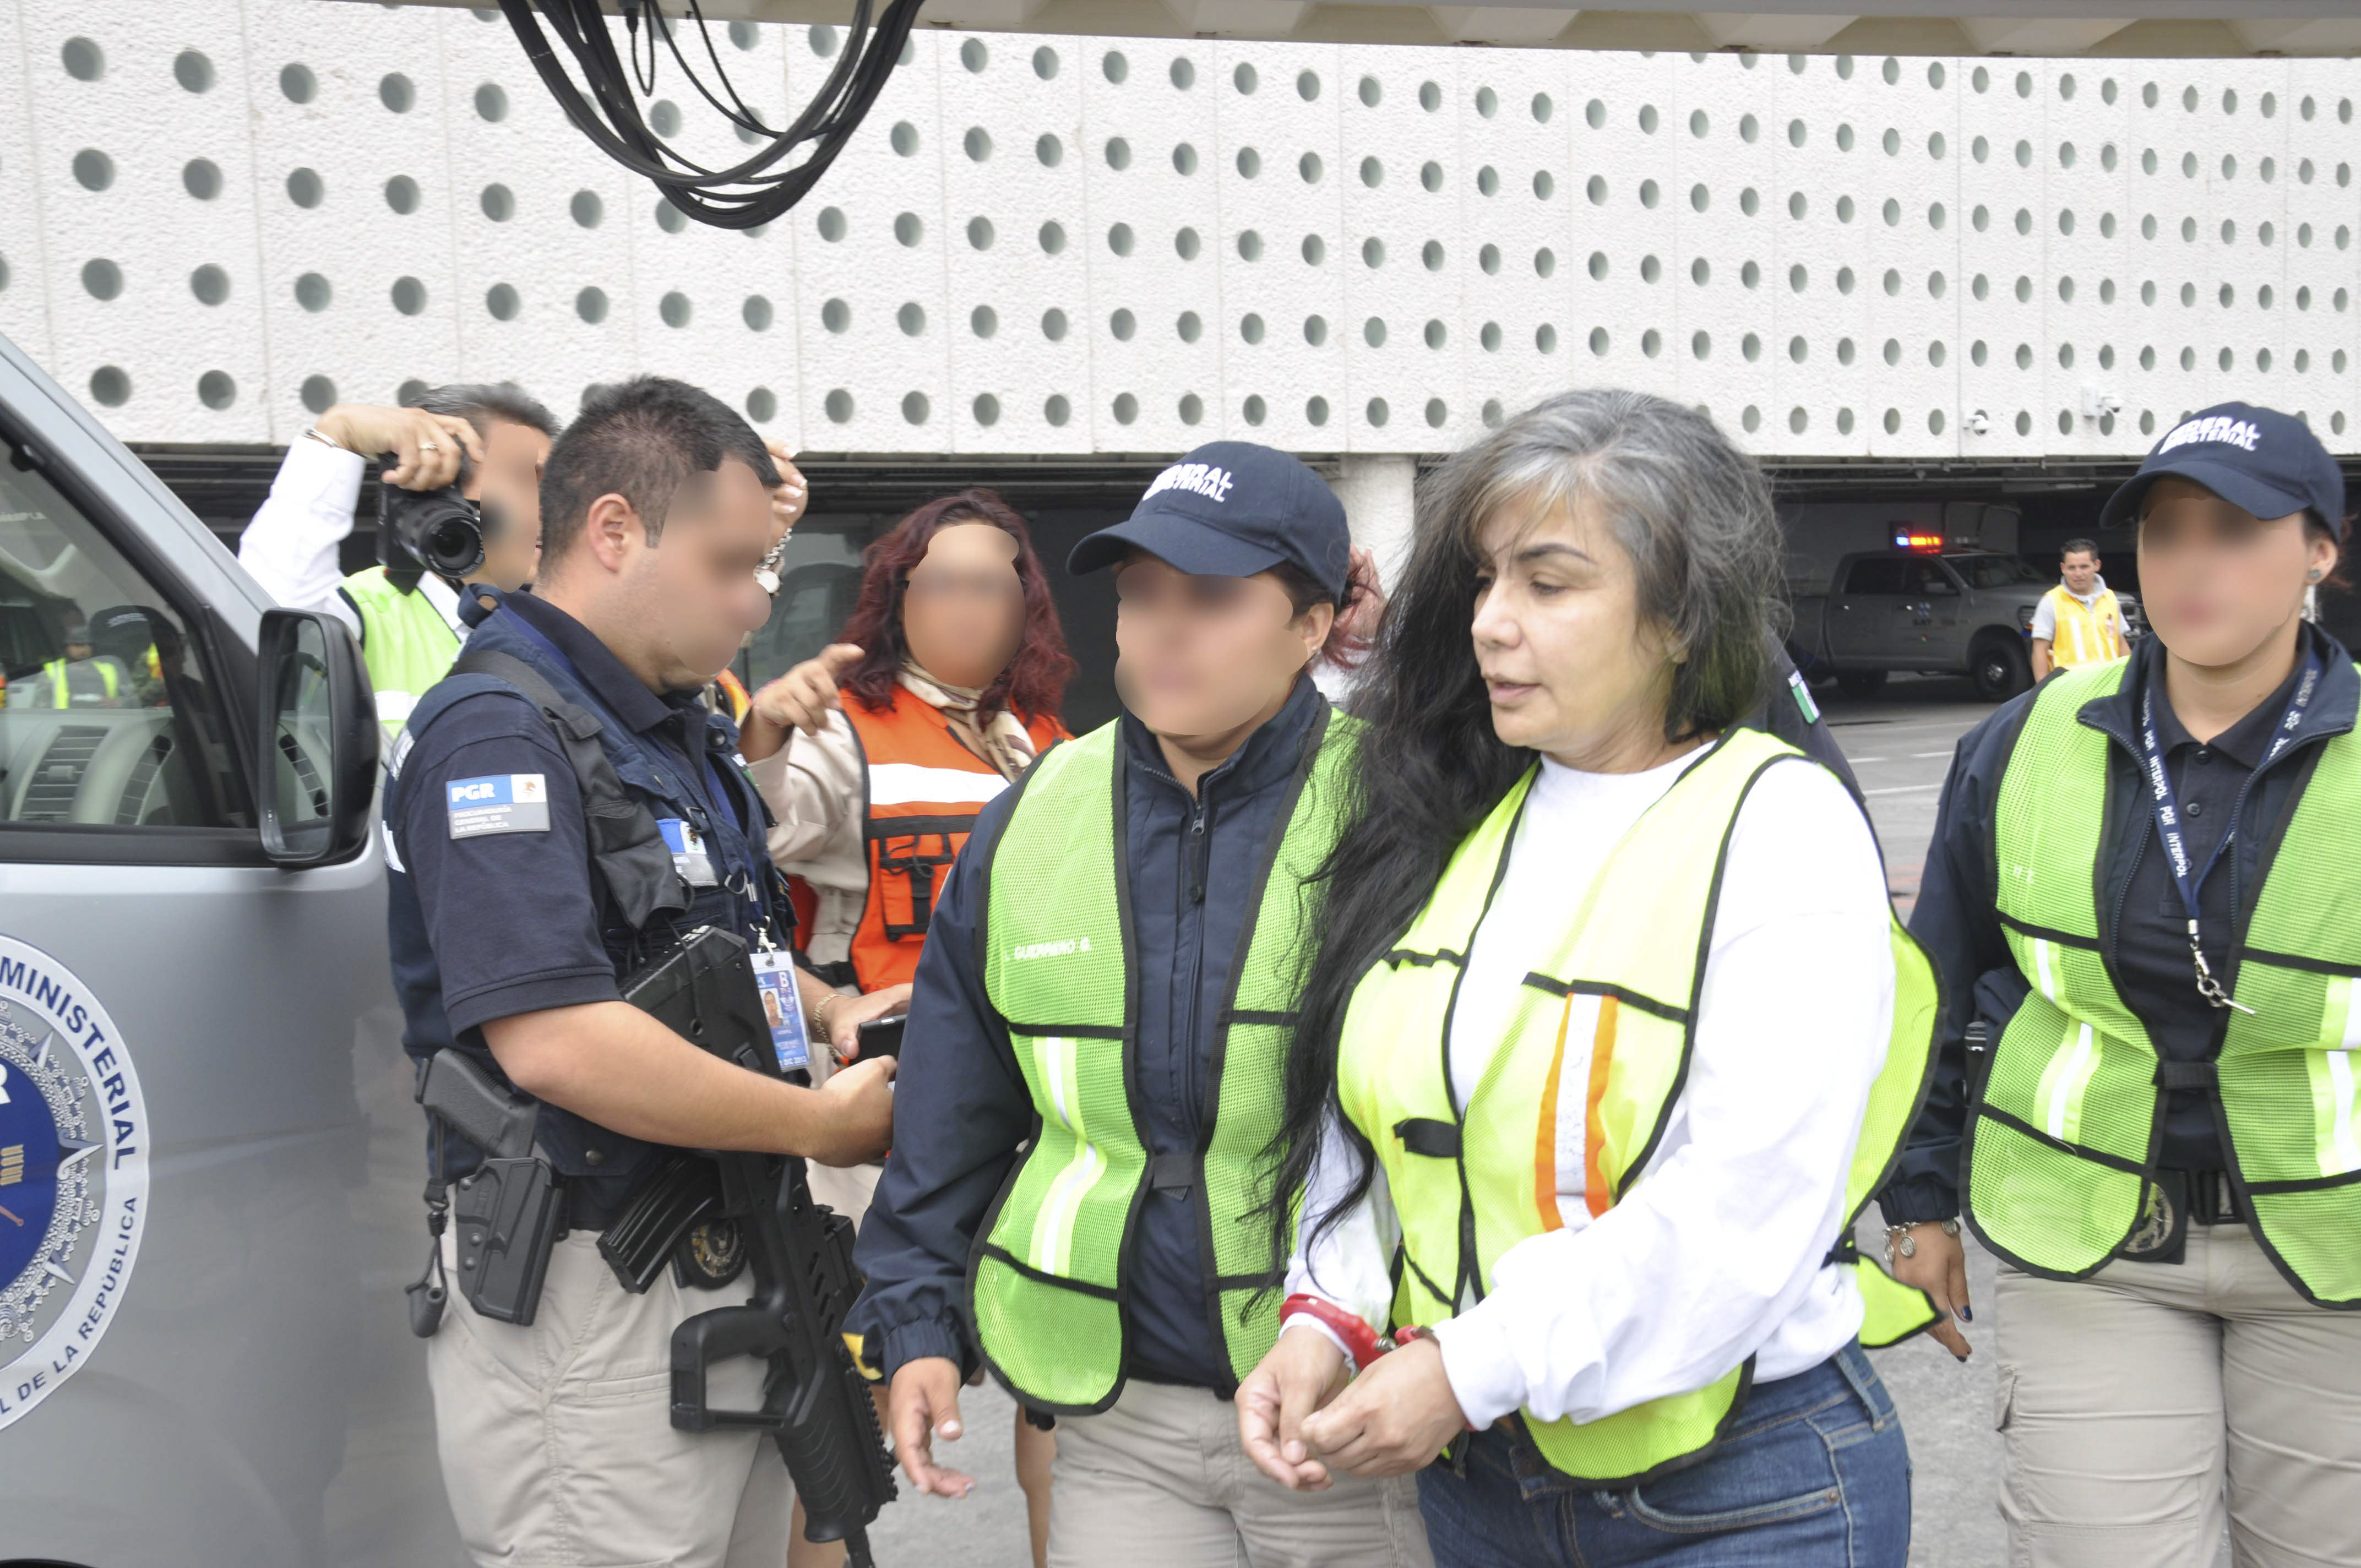 Sandra Ávila Beltrán was extradited to the United States in August 2012 (Photo: Cuartoscuro)